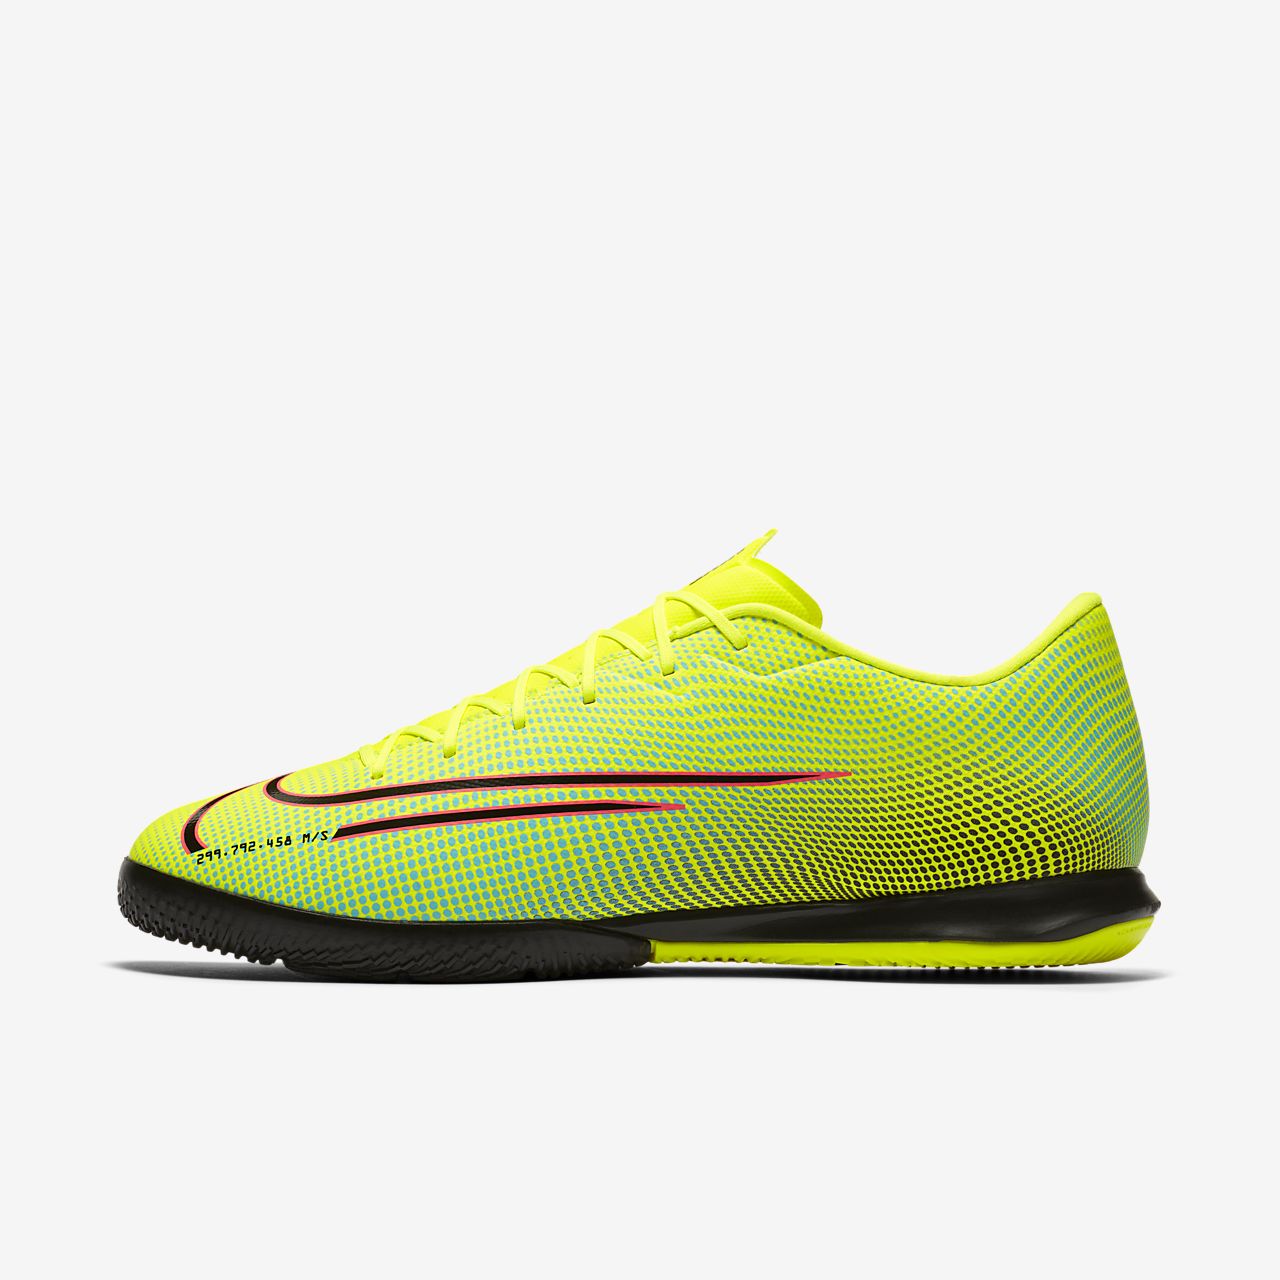 Nike Mercurial Vapor 13 Pro MDS Firm Ground Soccer Cleats.